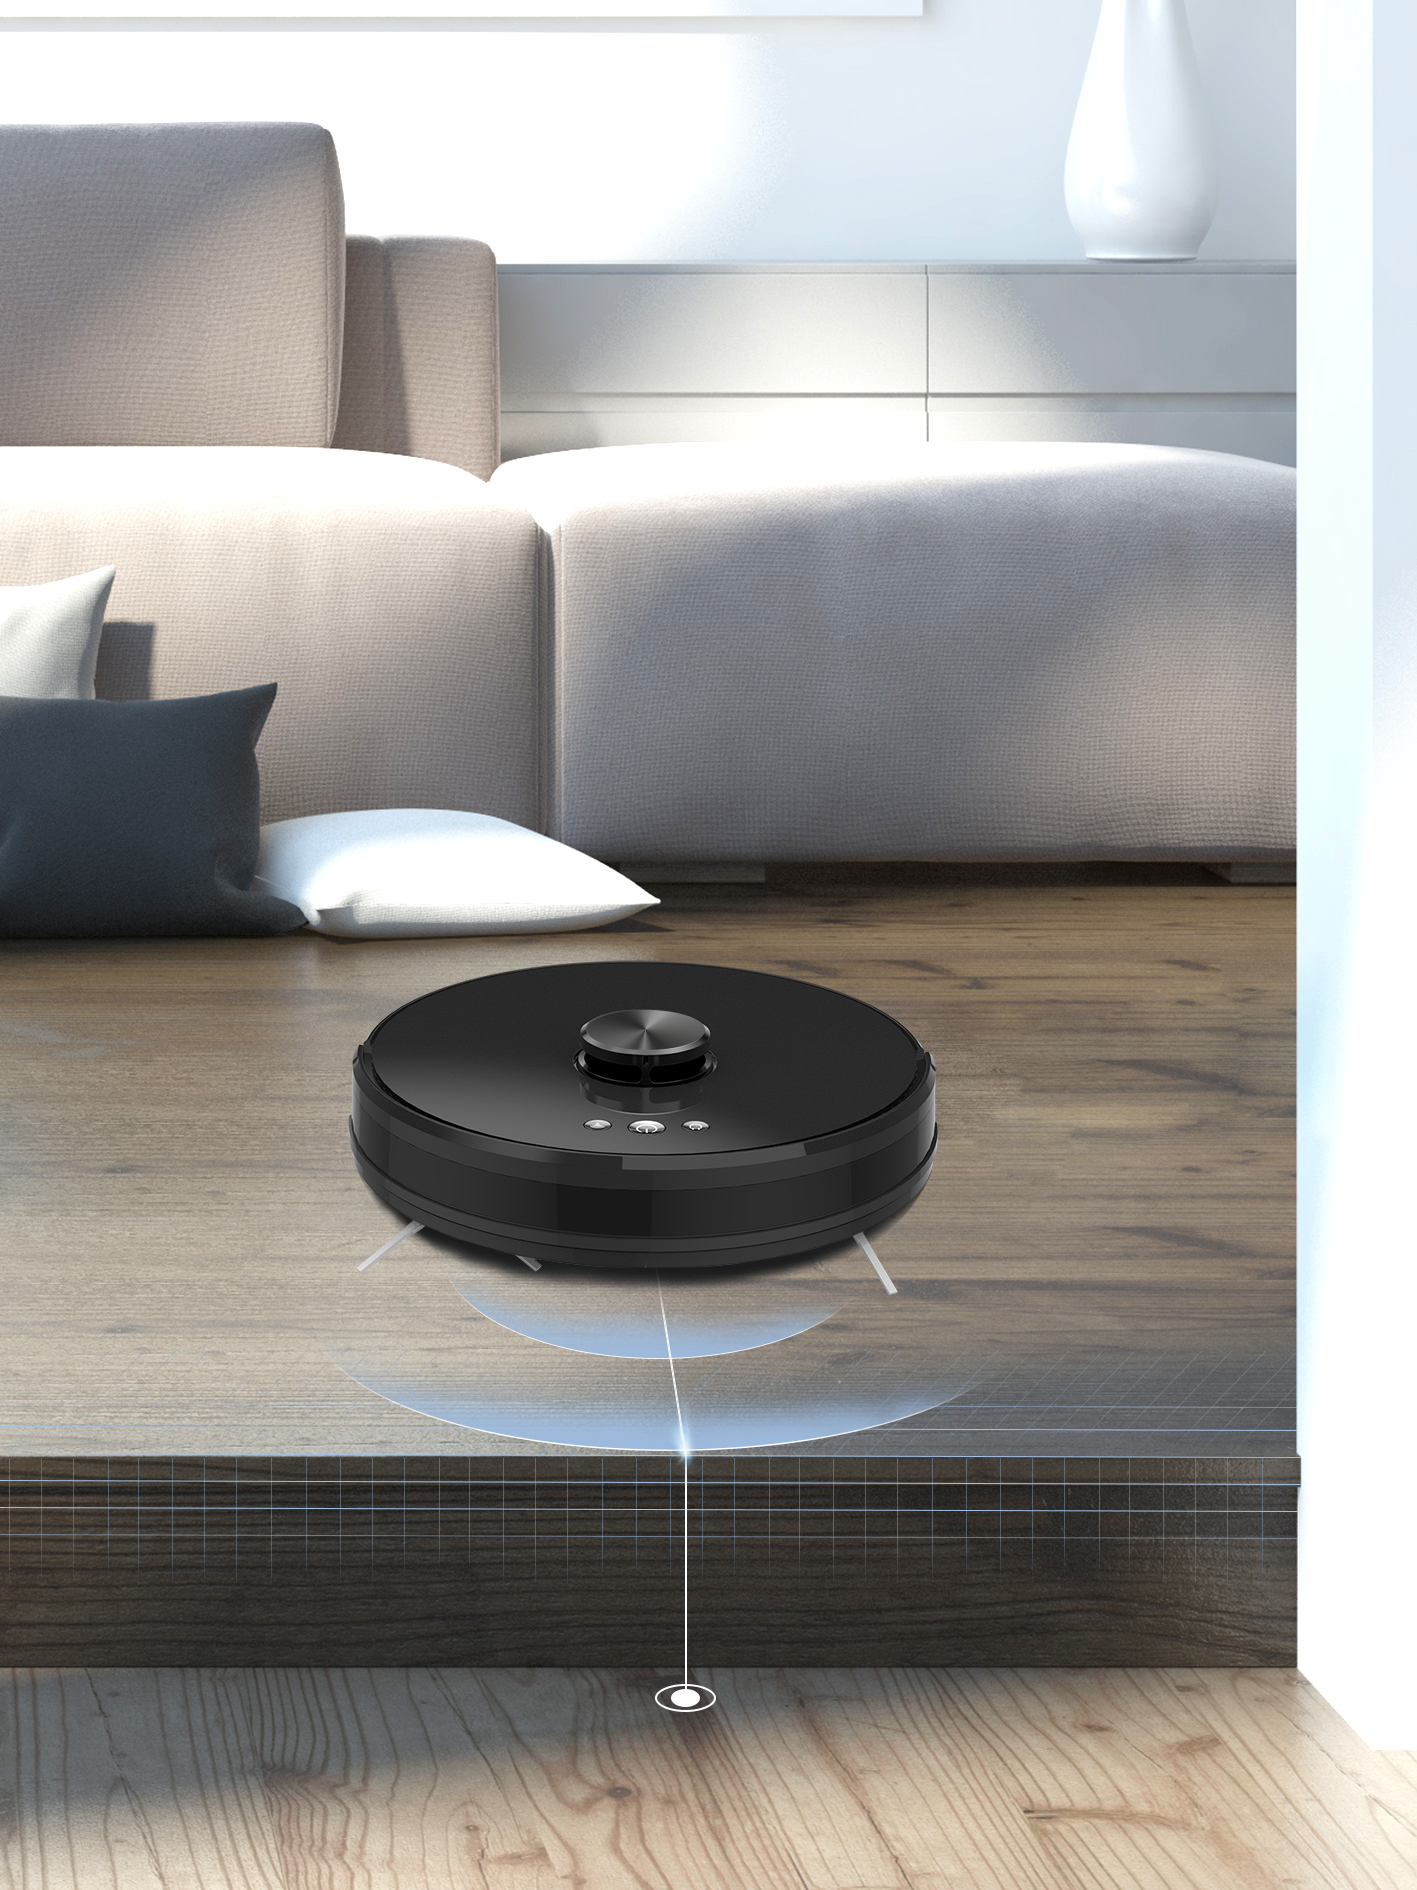 Robot Vacuum Cleaner For Carpet And Hardwood Floors with Advanced High-end Navigation Features